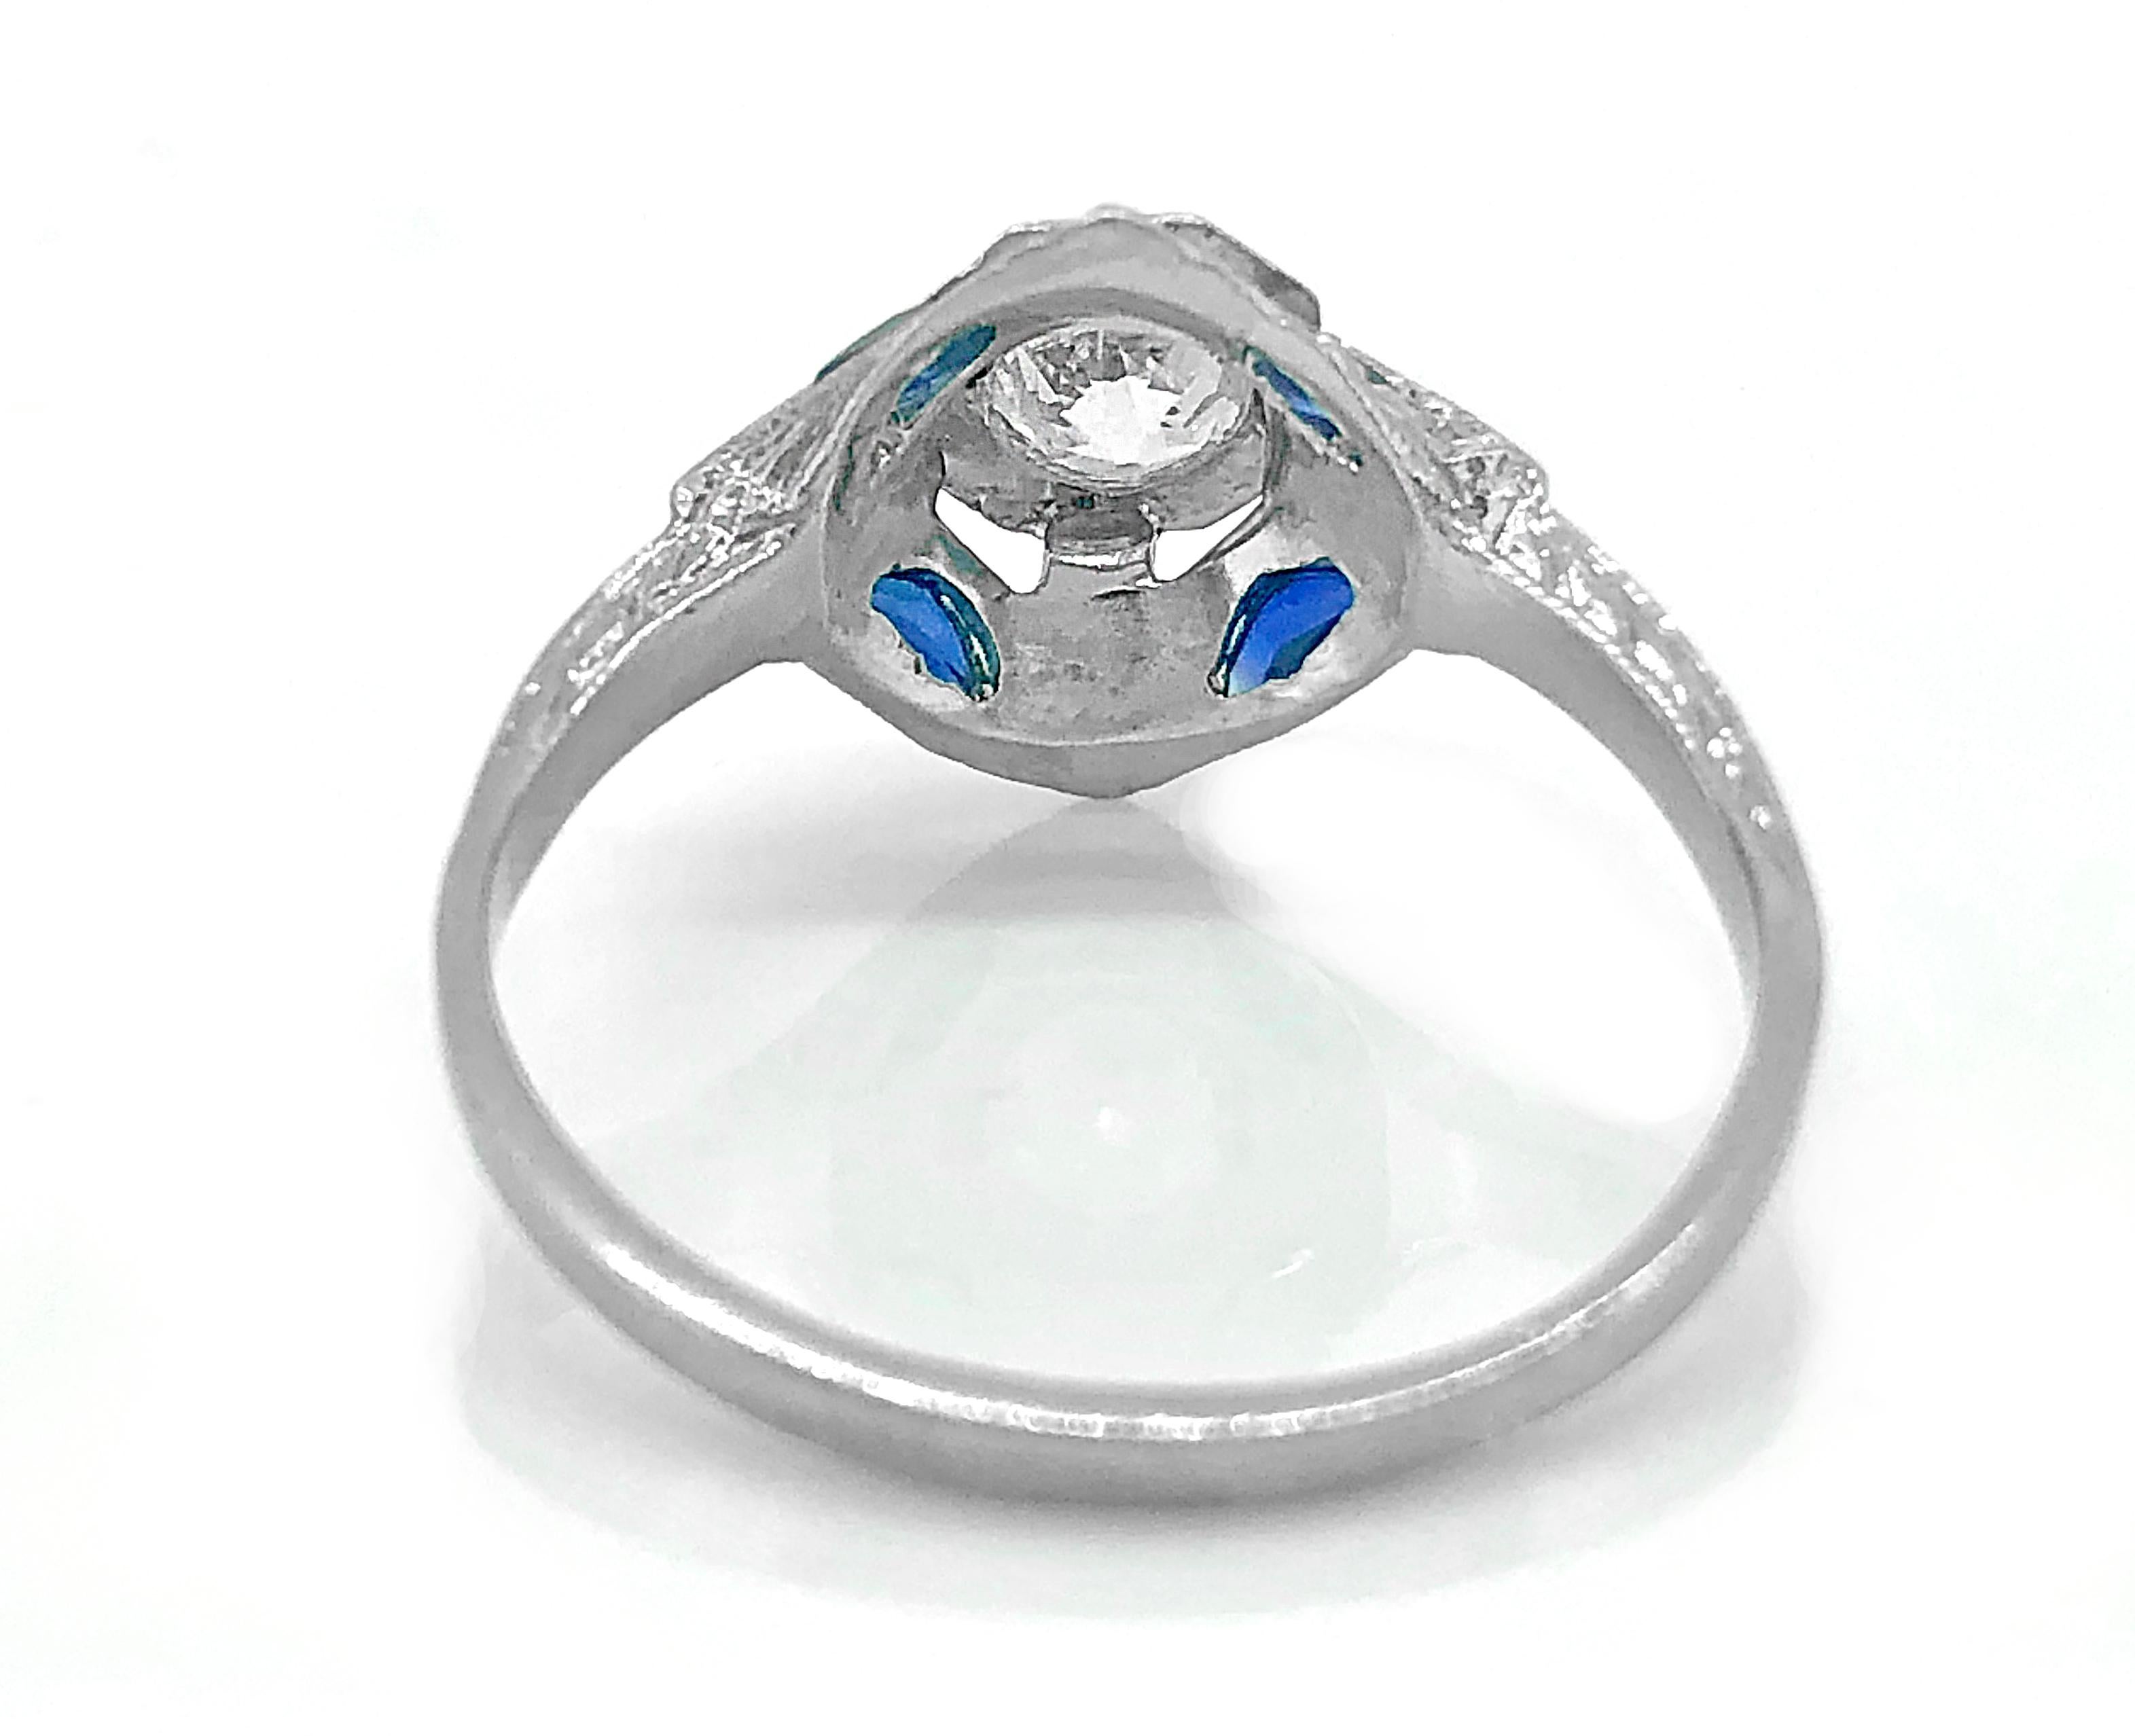 Antique Engagement Ring .43 Carat Diamond, Sapphire & 18K White Gold Art Deco In Excellent Condition For Sale In Tampa, FL